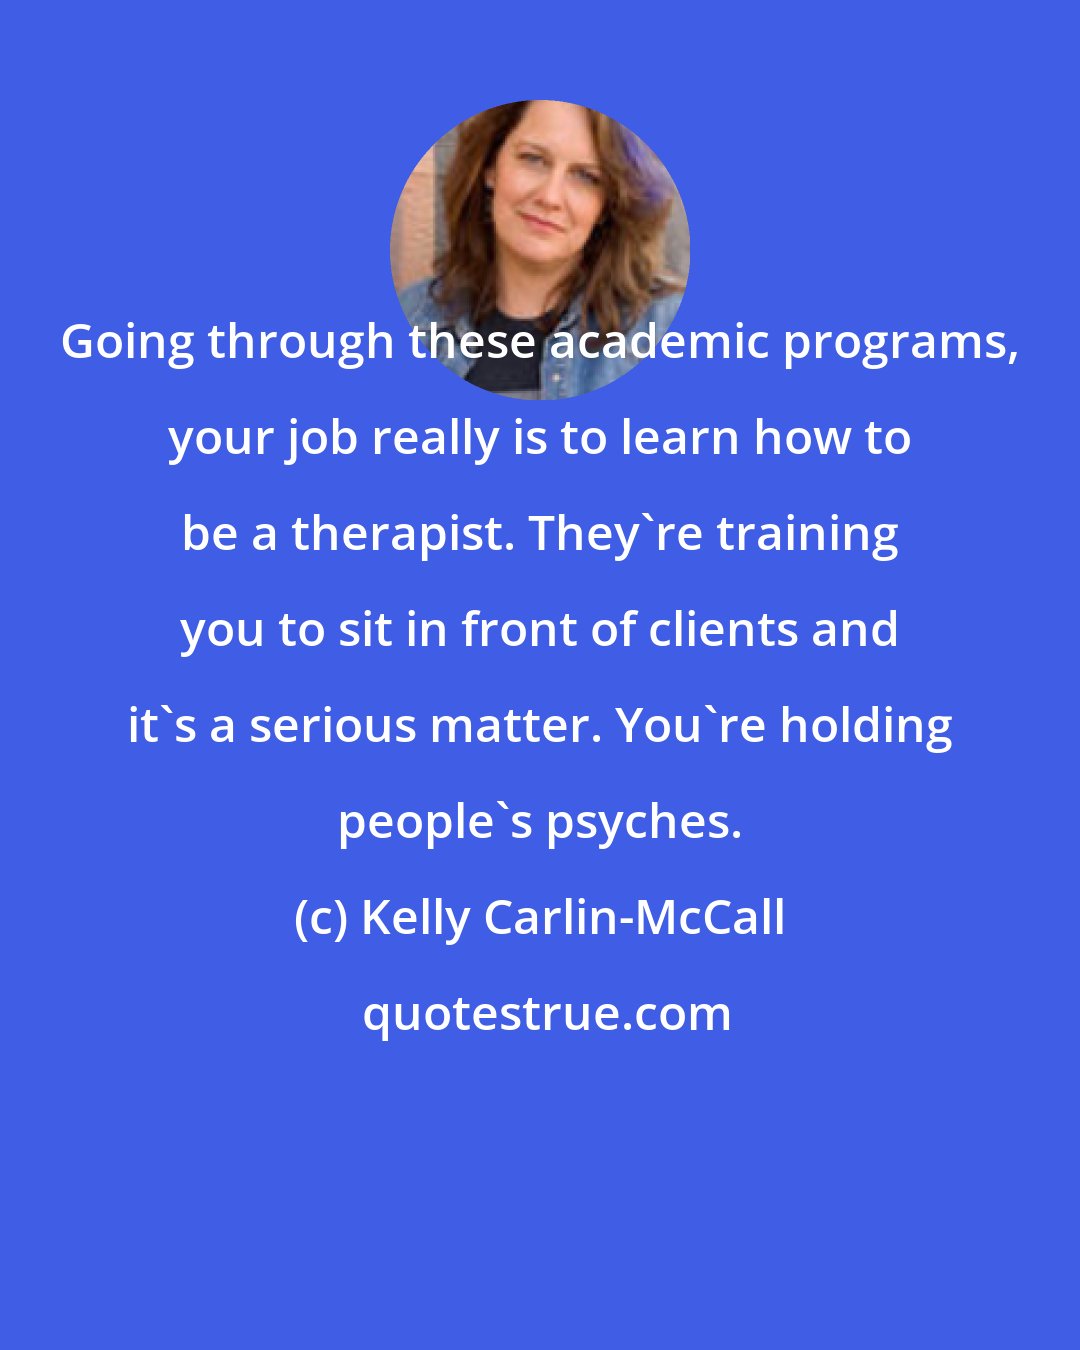 Kelly Carlin-McCall: Going through these academic programs, your job really is to learn how to be a therapist. They're training you to sit in front of clients and it's a serious matter. You're holding people's psyches.